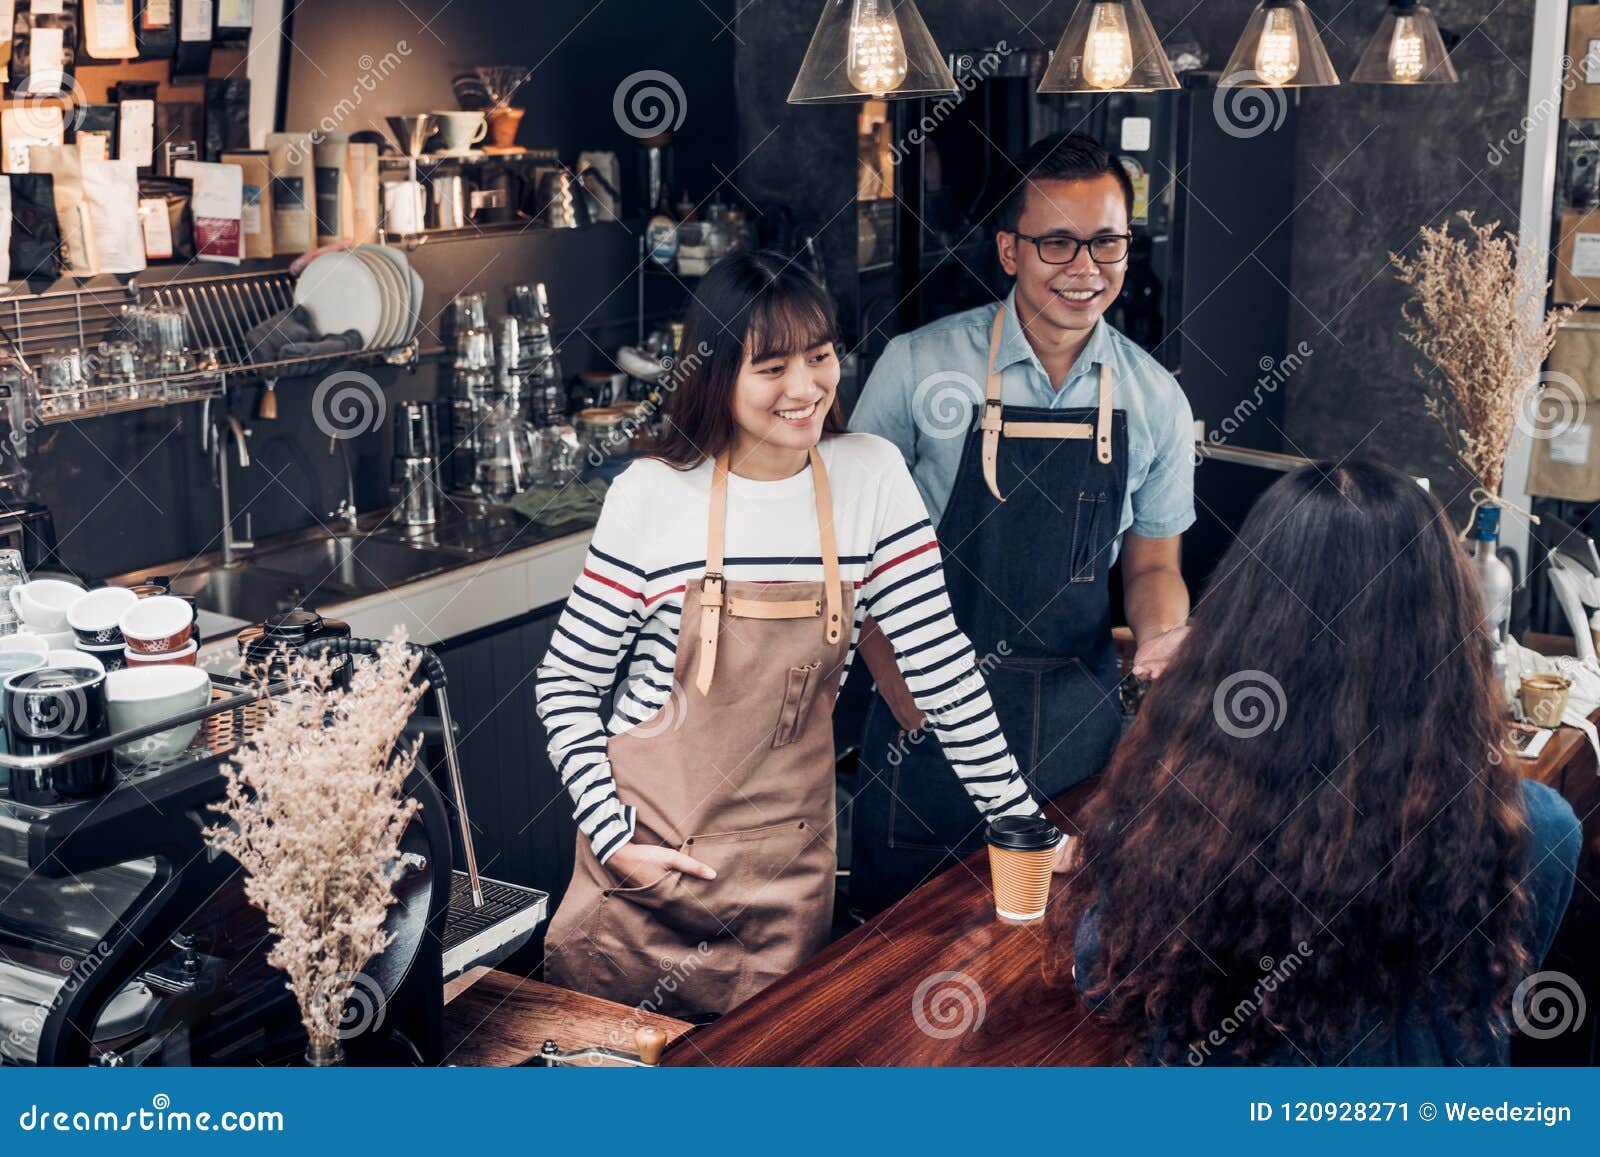 asia barista waiter and waitress take order from customer in coffee shop,two cafe owner writing drink order at counter